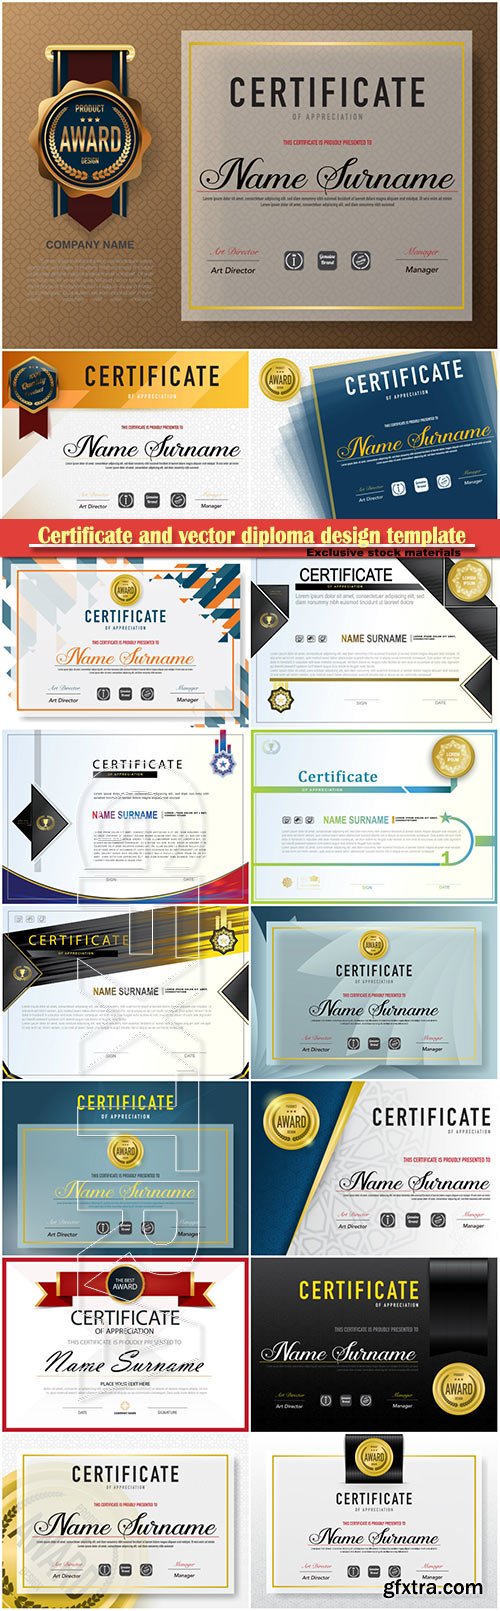 Certificate and vector diploma design template # 42